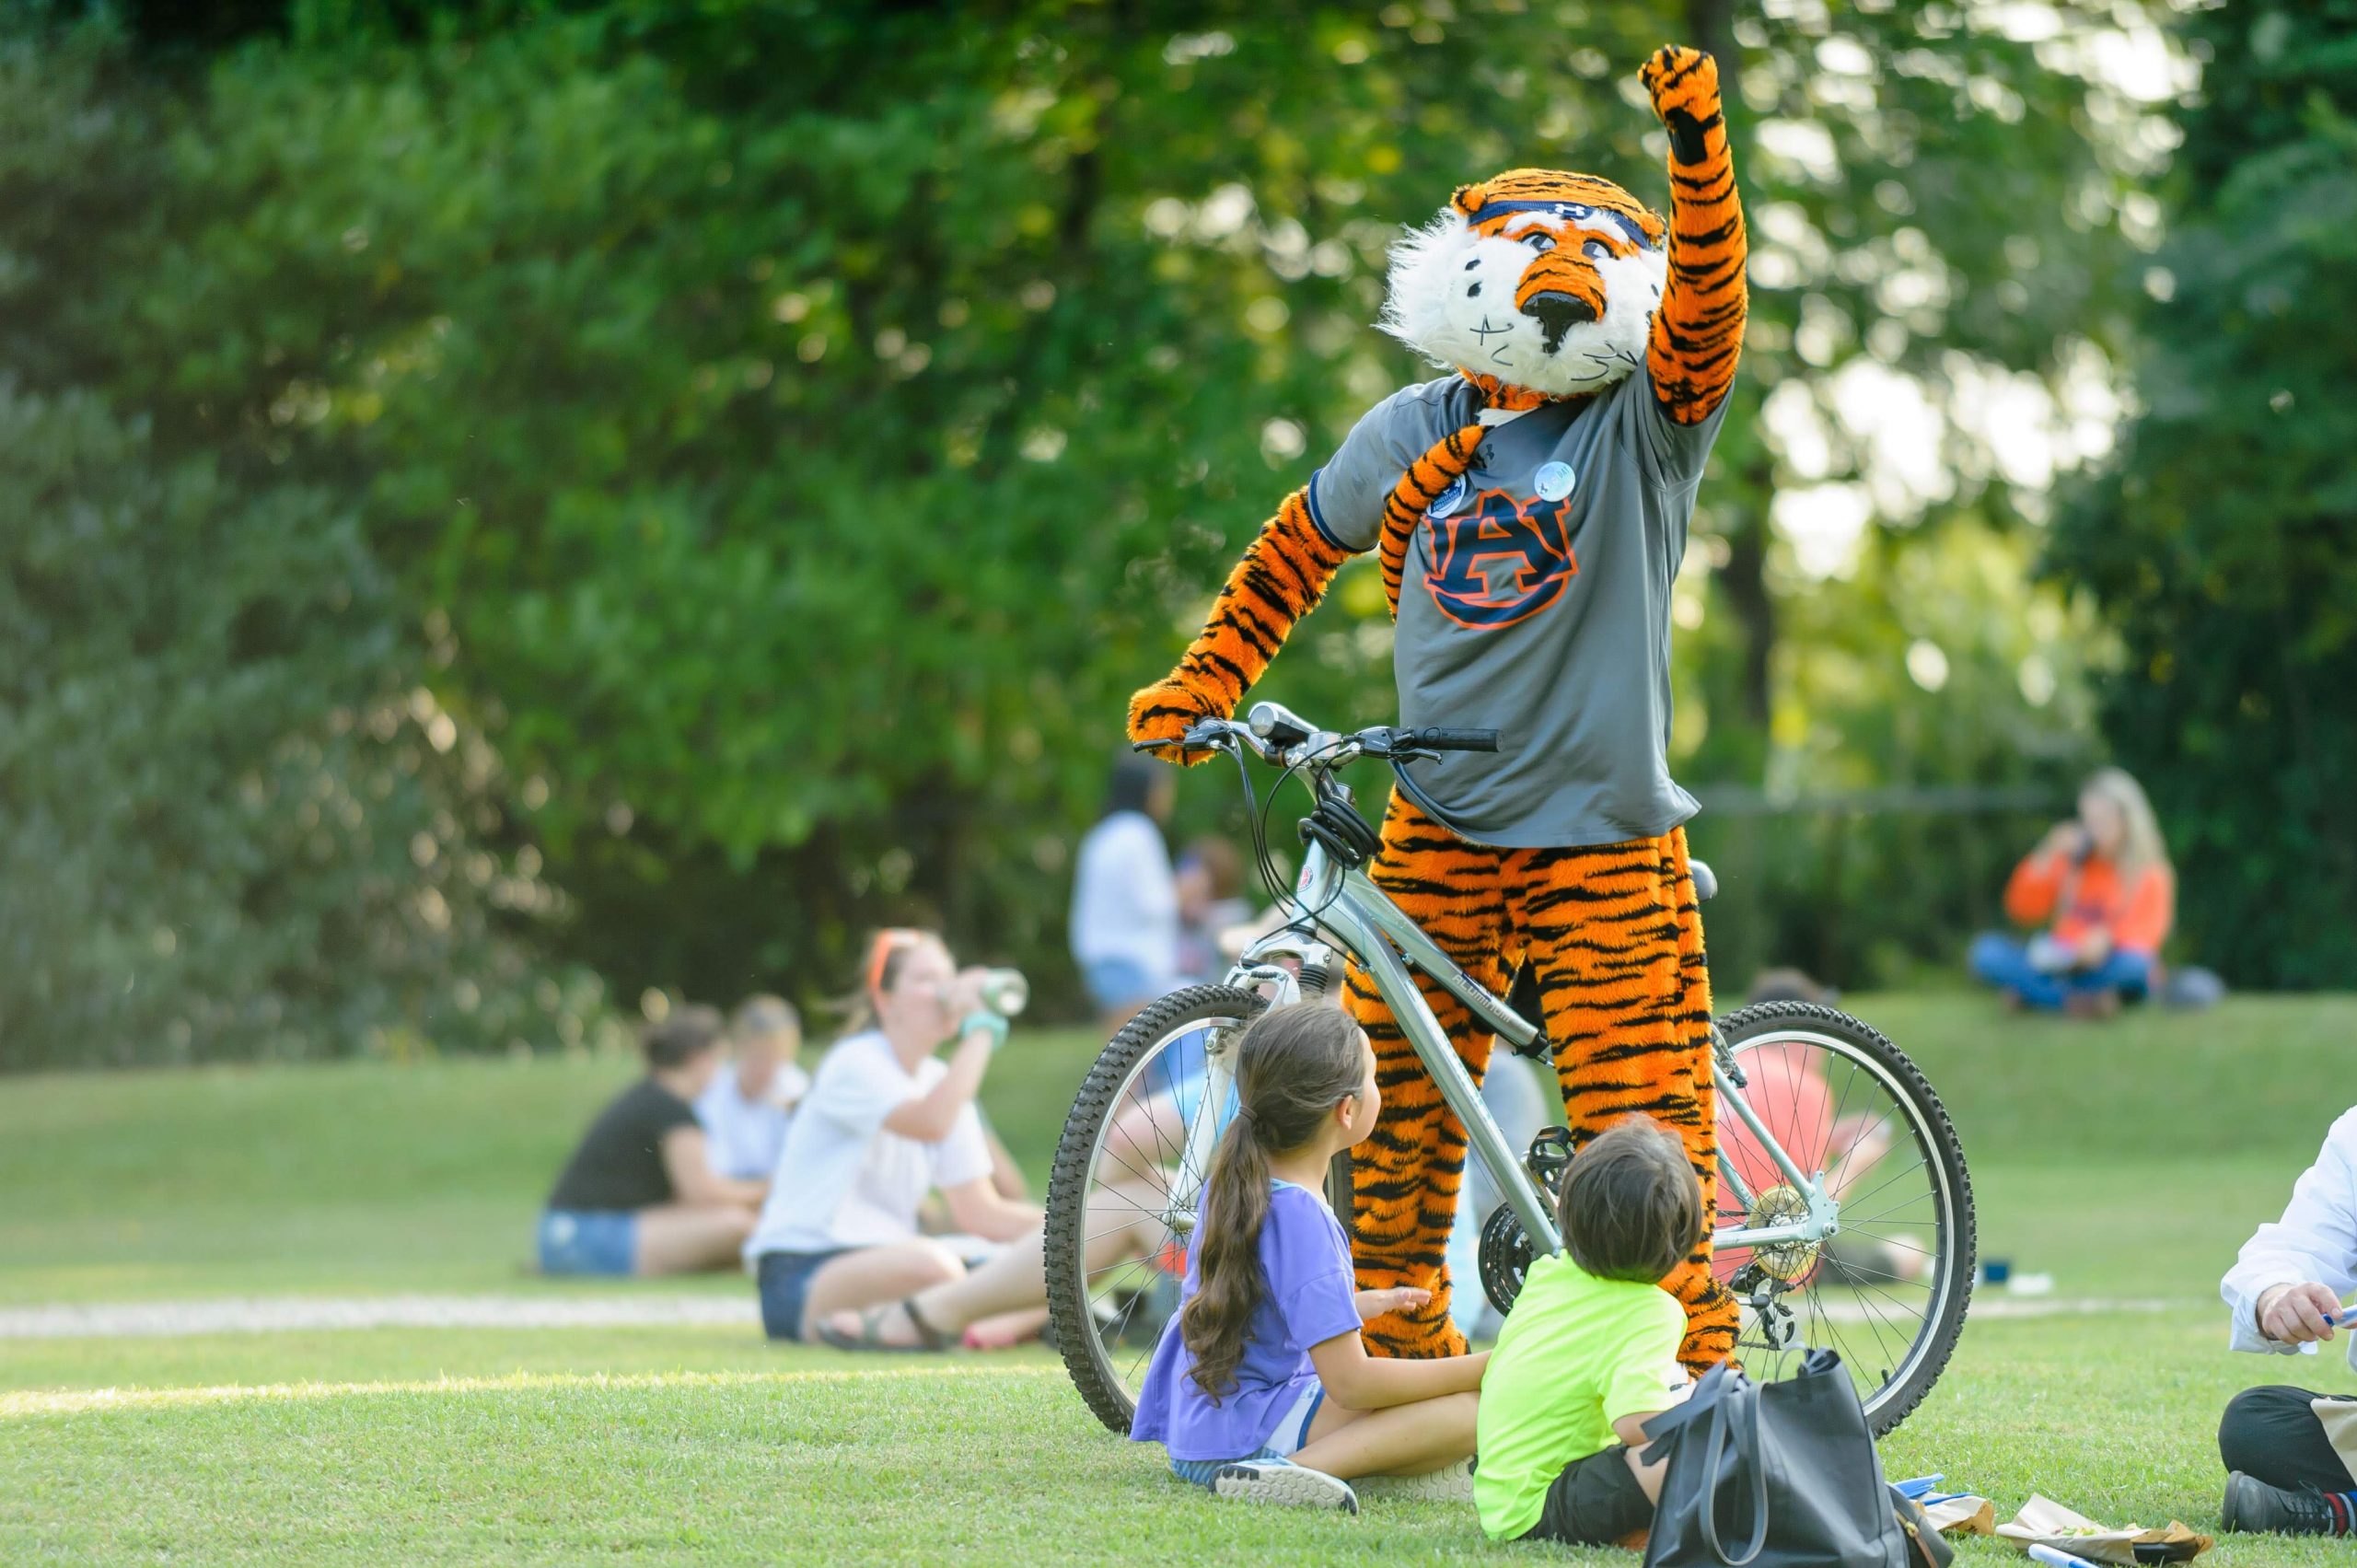 Photo of Aubie on a bicycle with his fist raised.